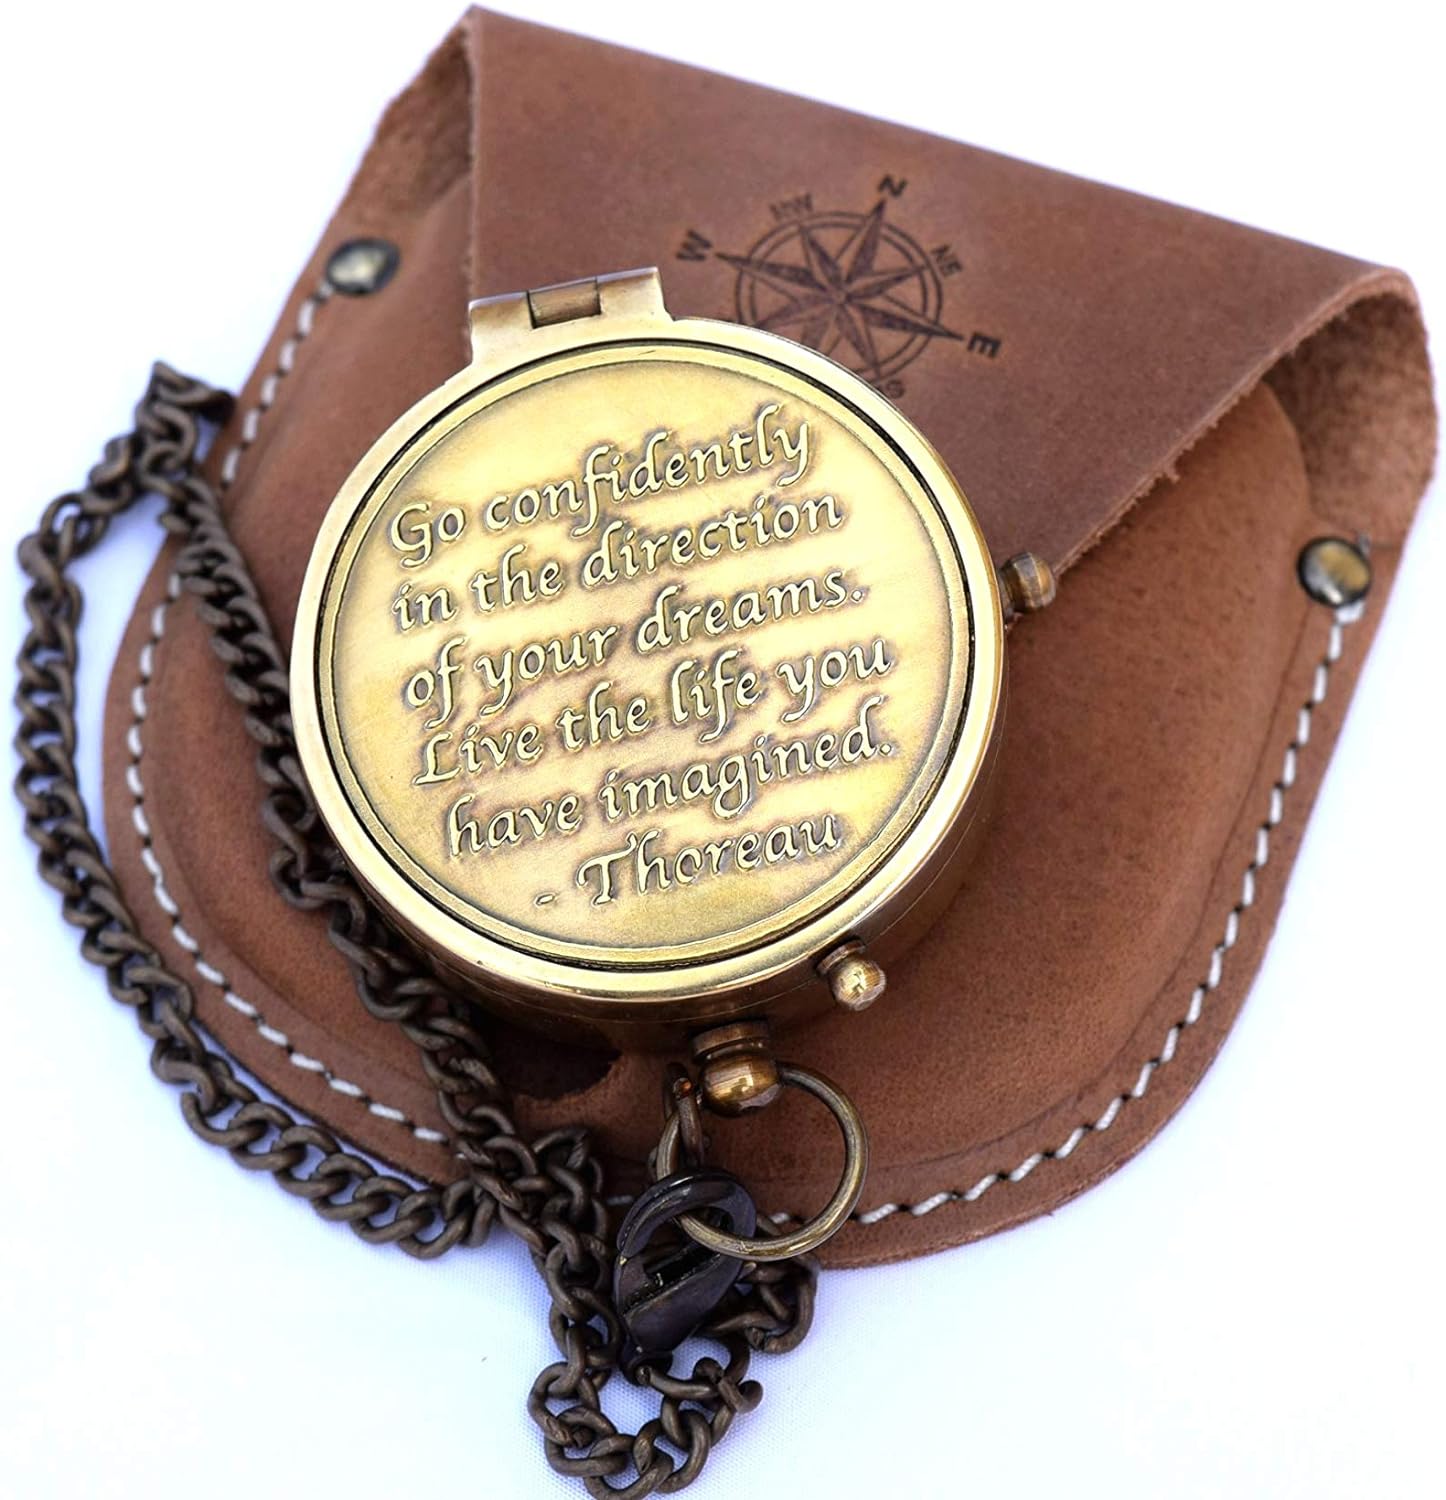 NEOVIVID Brass Compass Engraved with Thoreau' Go Confidently Quote and Stamped Leather Case, Boys Gifts